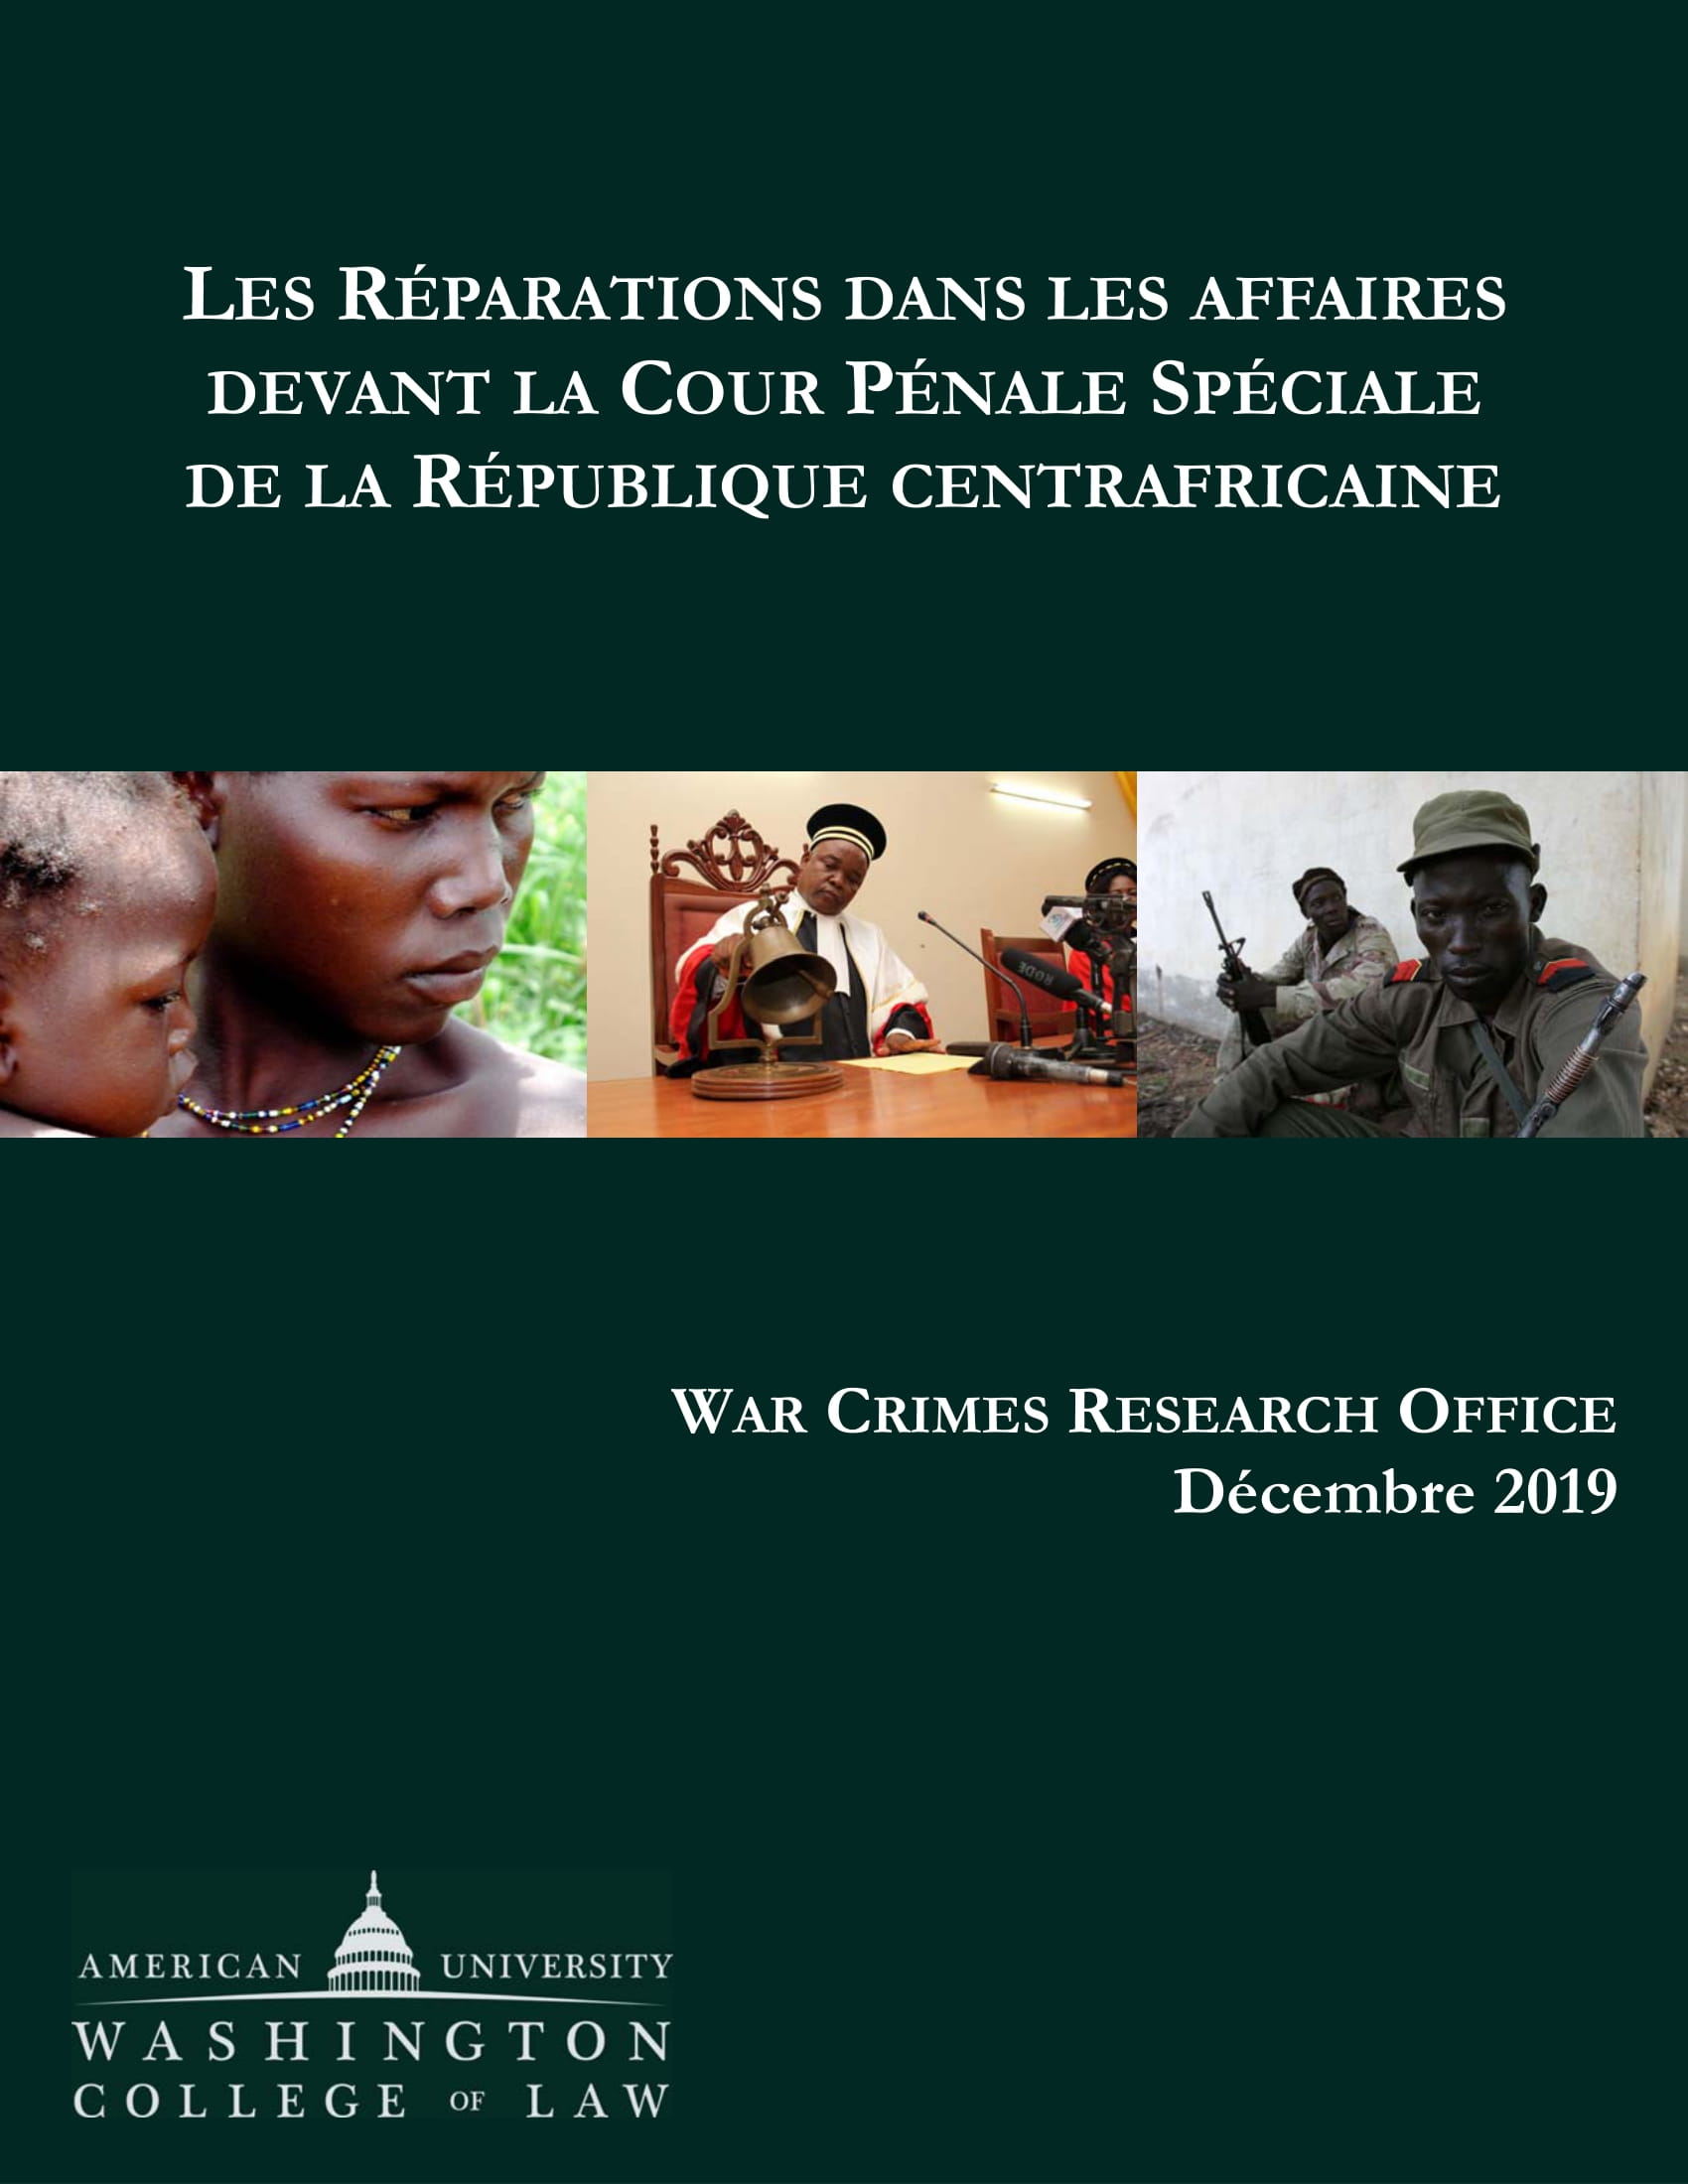 Case-Based Reparations Report (Central African Republic) (French)